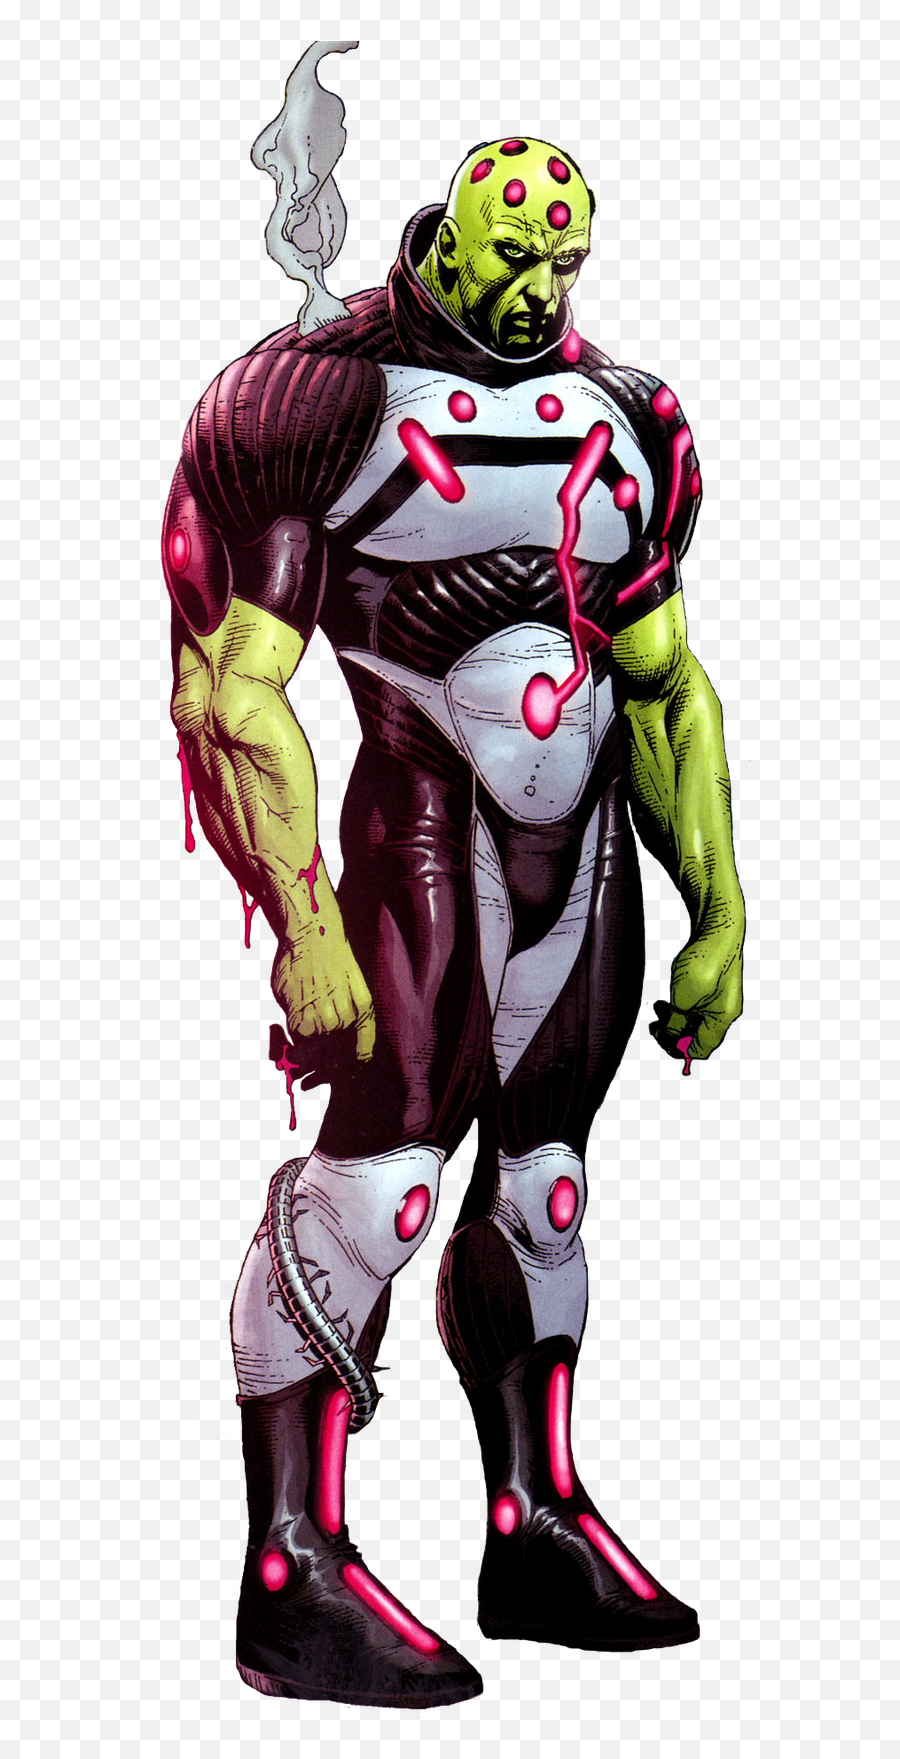 Marvel And Dc Universe - Brainiac Superman Emoji,Never Let Your Emotions Overpower Your Intelligence